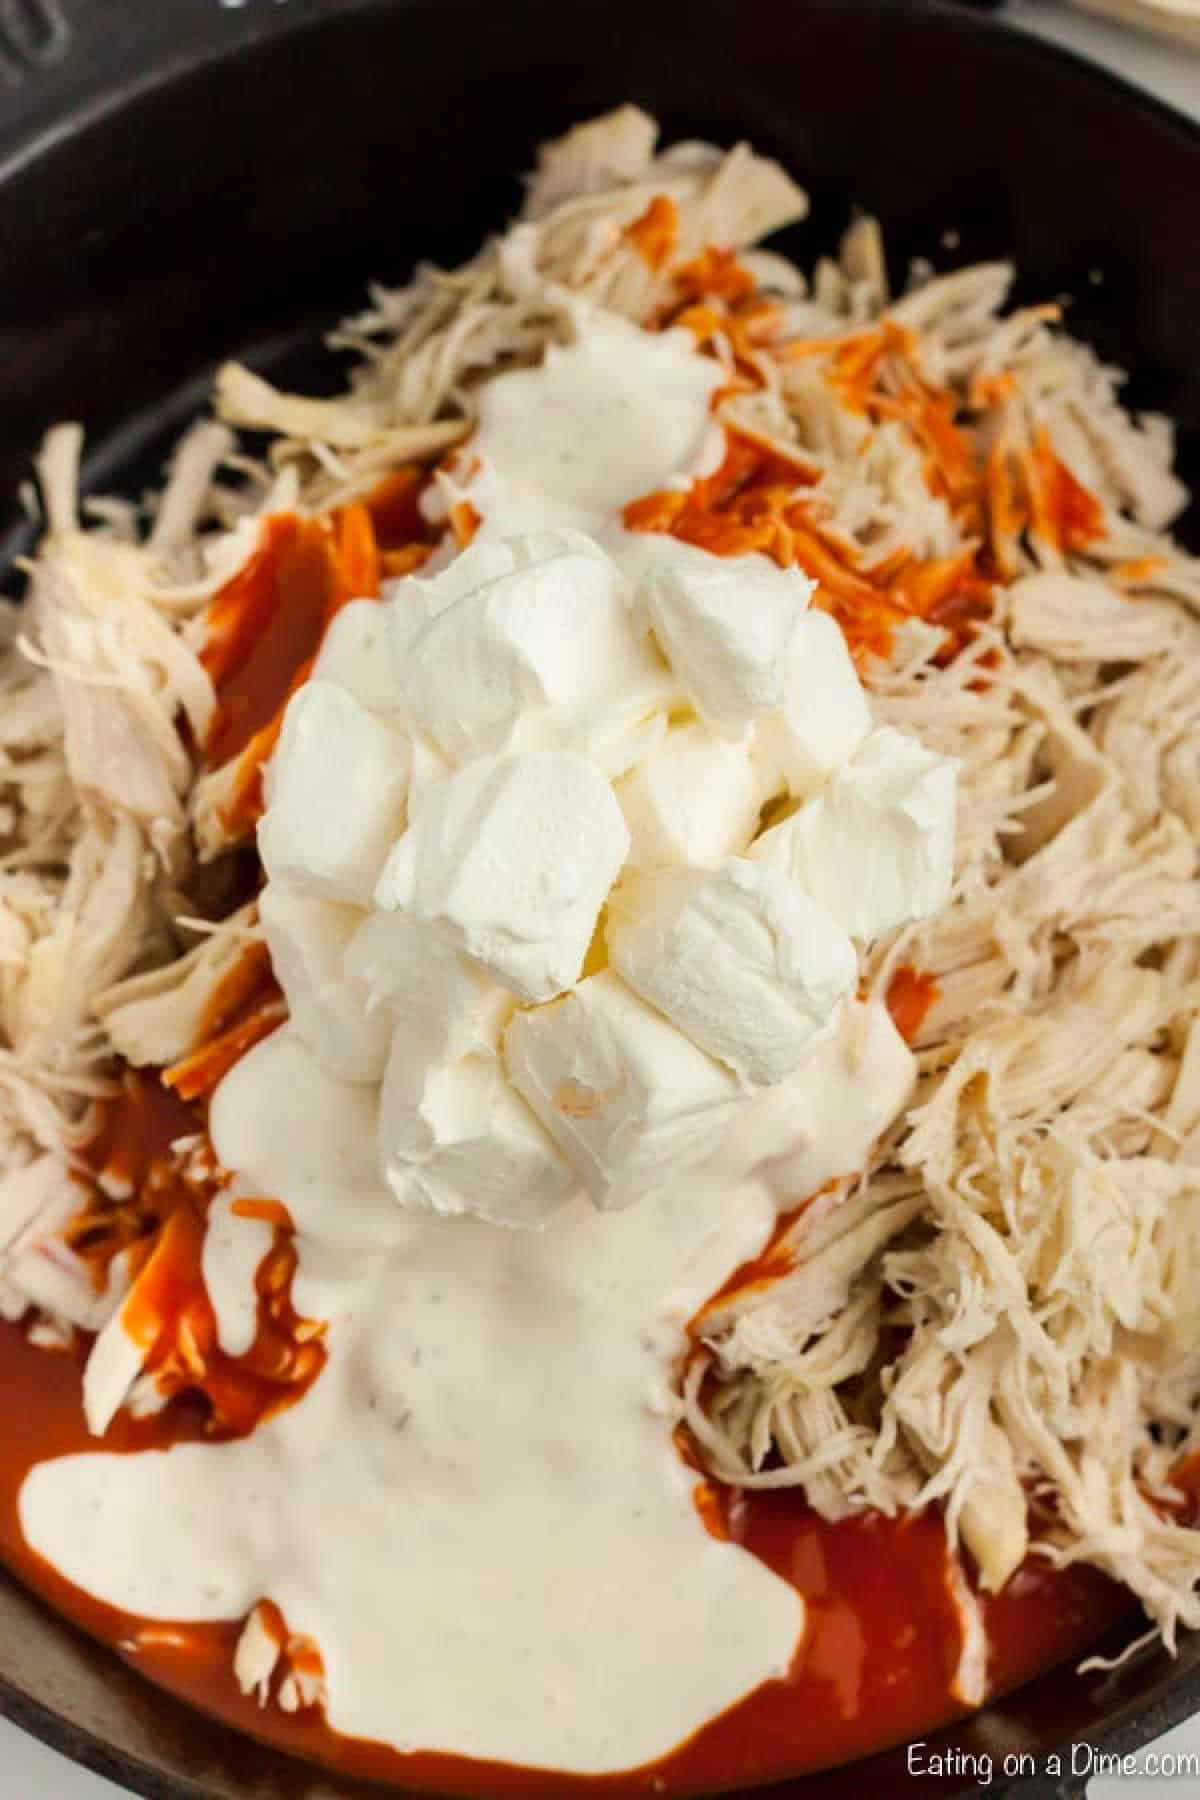 Shredded chicken topped with buffalo sauce and cream cheese cubes